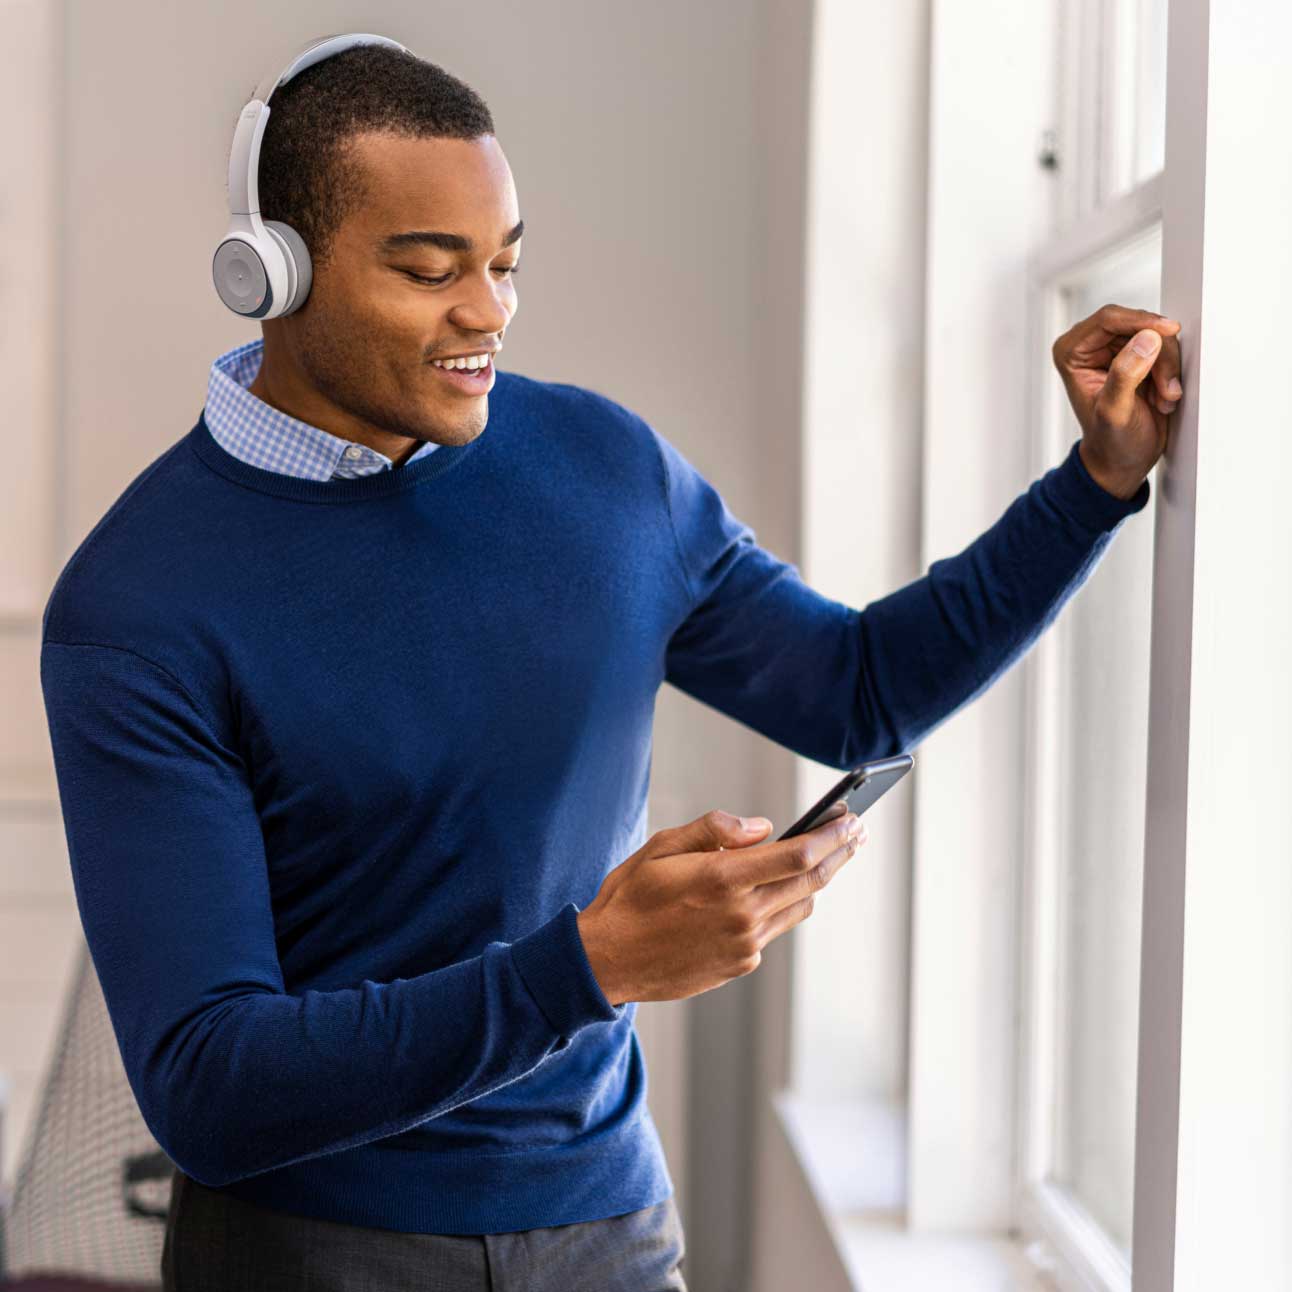 User connects with ease thanks to Webex Contact Center